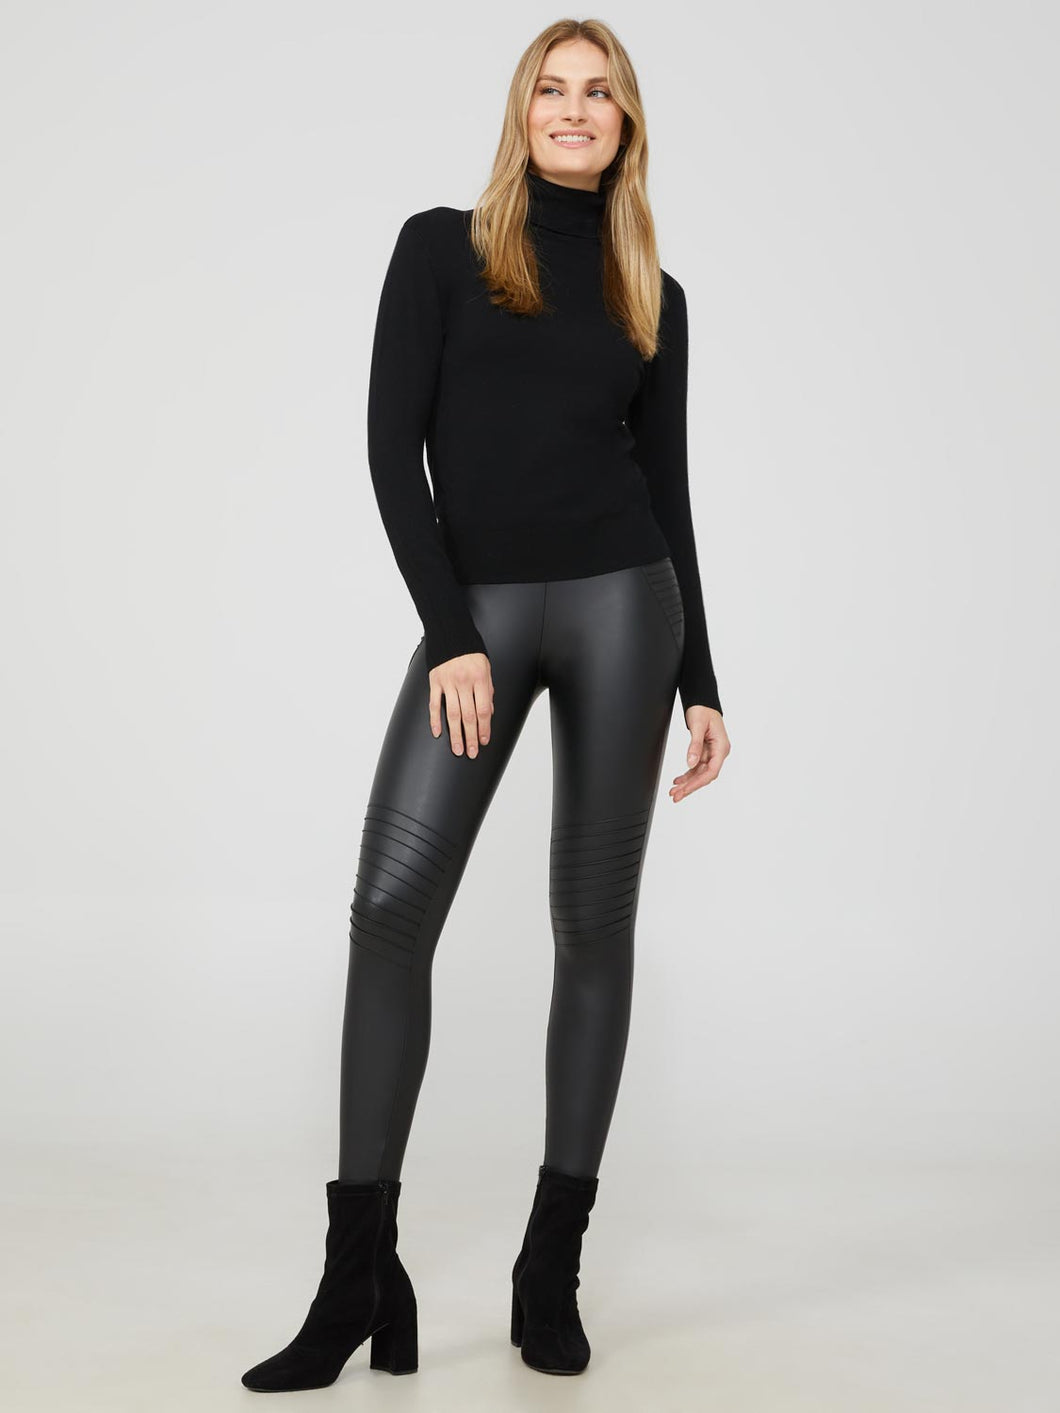 Passing Time Black Faux Leather Leggings  Plus size legging outfits,  Outfits with leggings, Plus size fall outfit